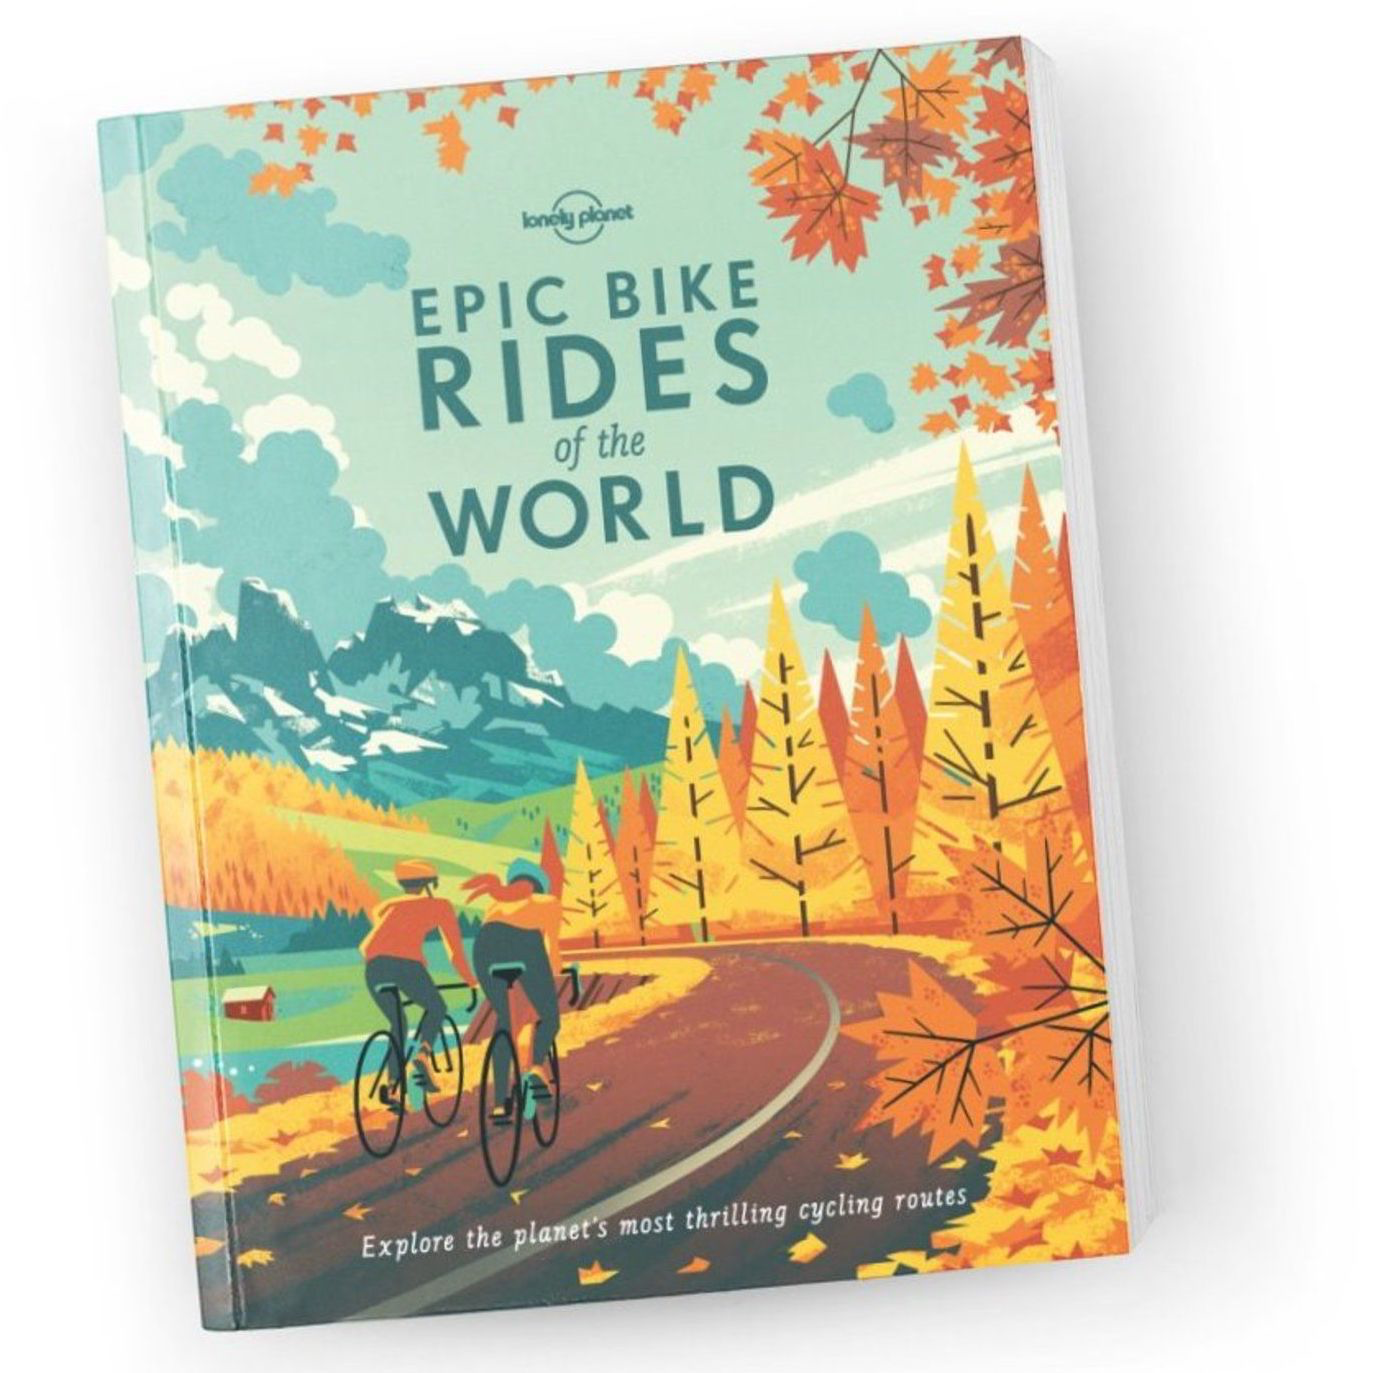 Epic bike Rides of the World book from Lonely Planet